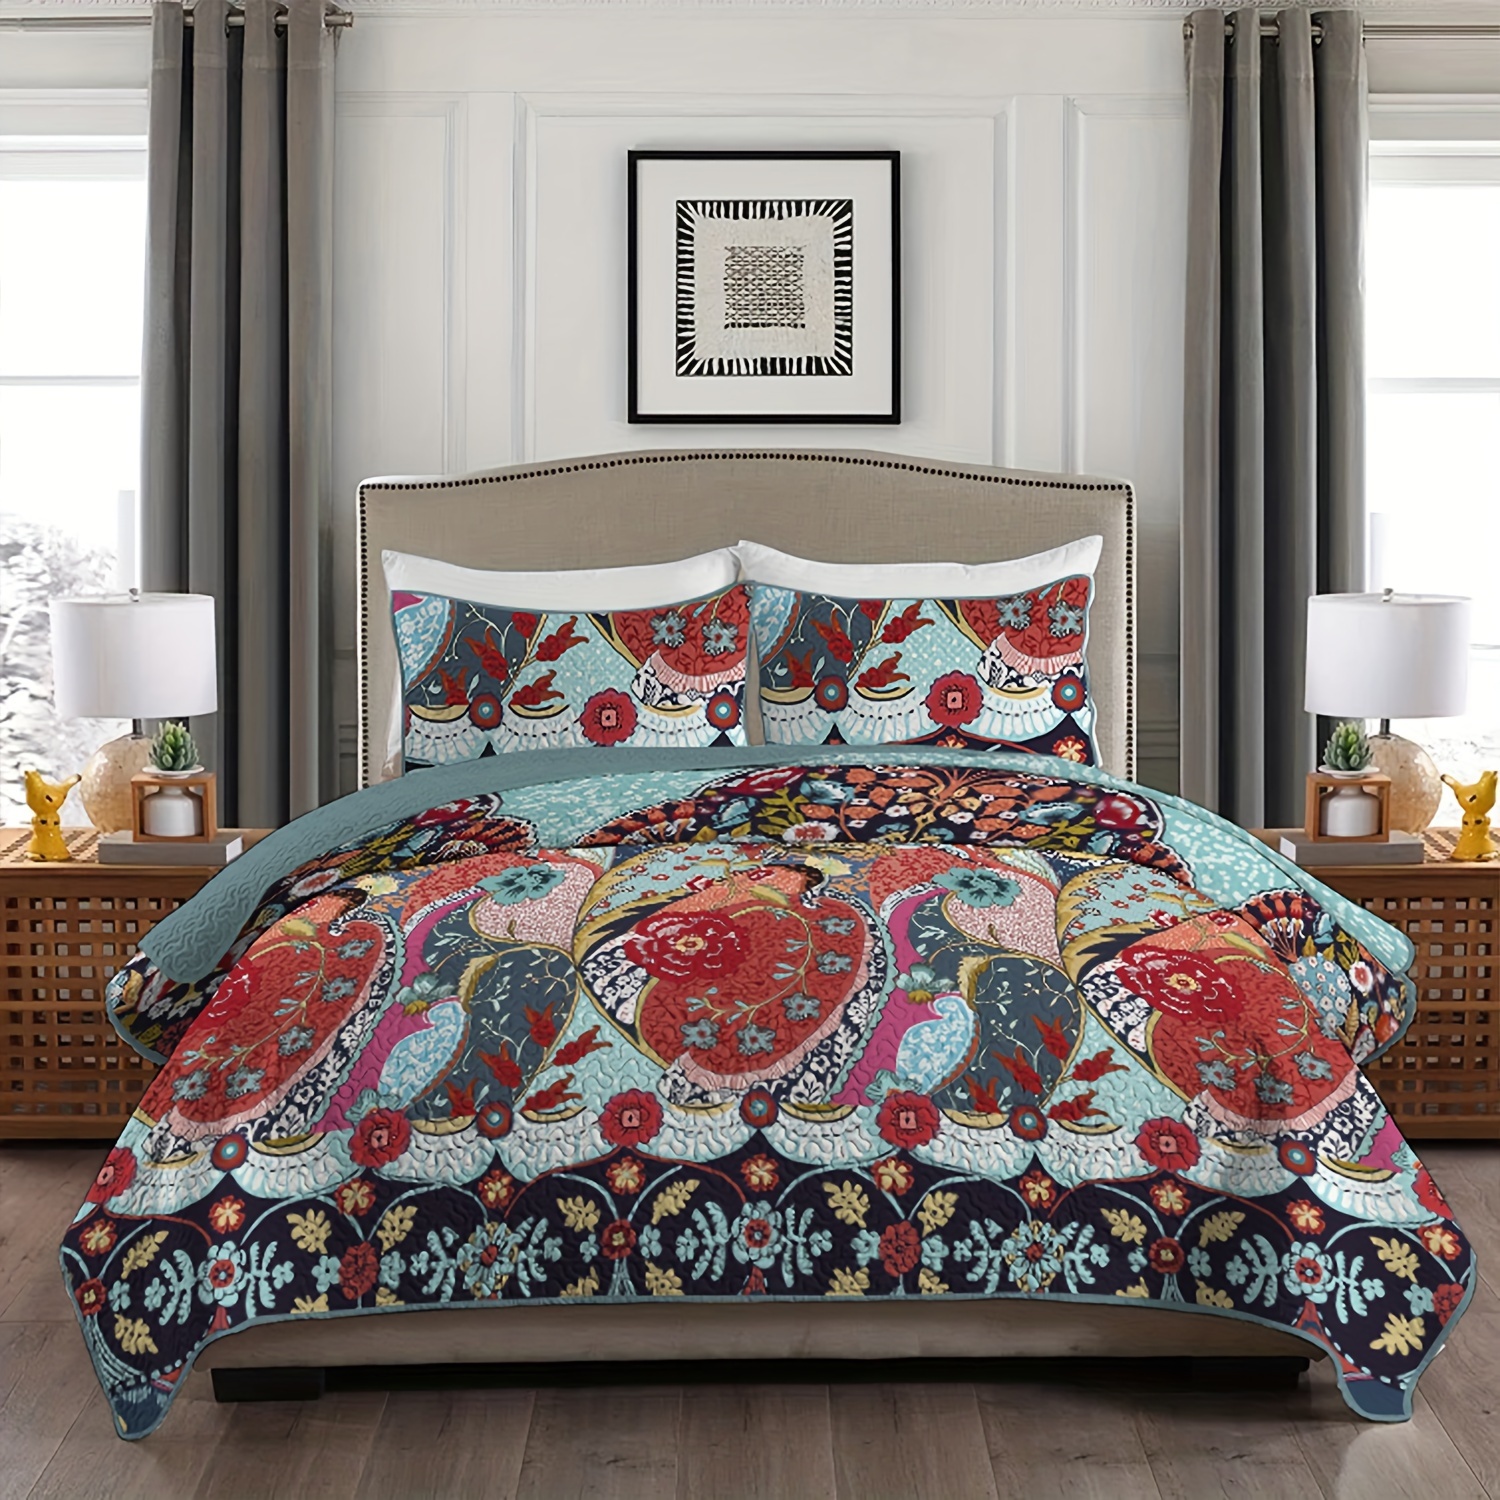 

3pcs Vintage Style Flowers Bedspread Set (1 Bedspread + 2 Pillowcases, No Filling), Comfortable And Elegant Colorful Floral Pattern Bedding, Soft Lightweight Coverlet For All Seasons